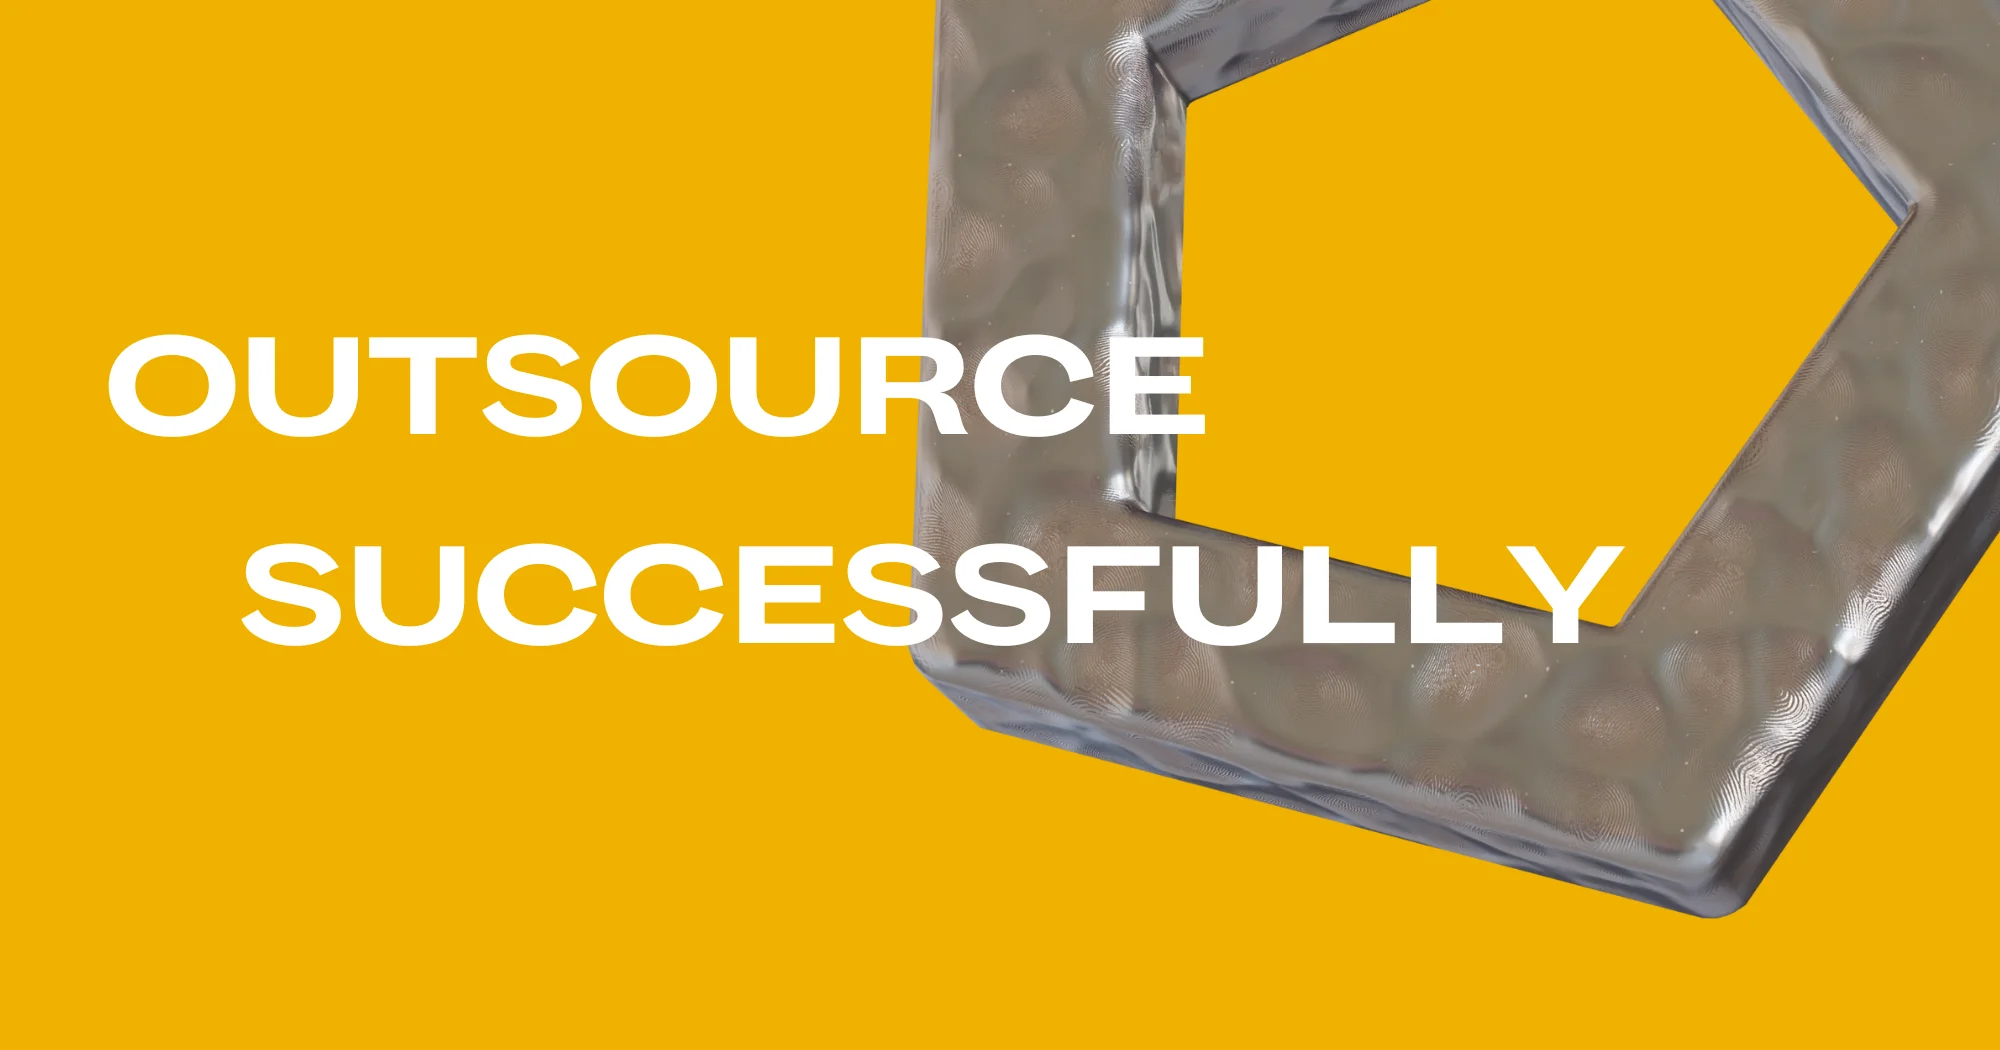 How to Outsource Software Development Successfully